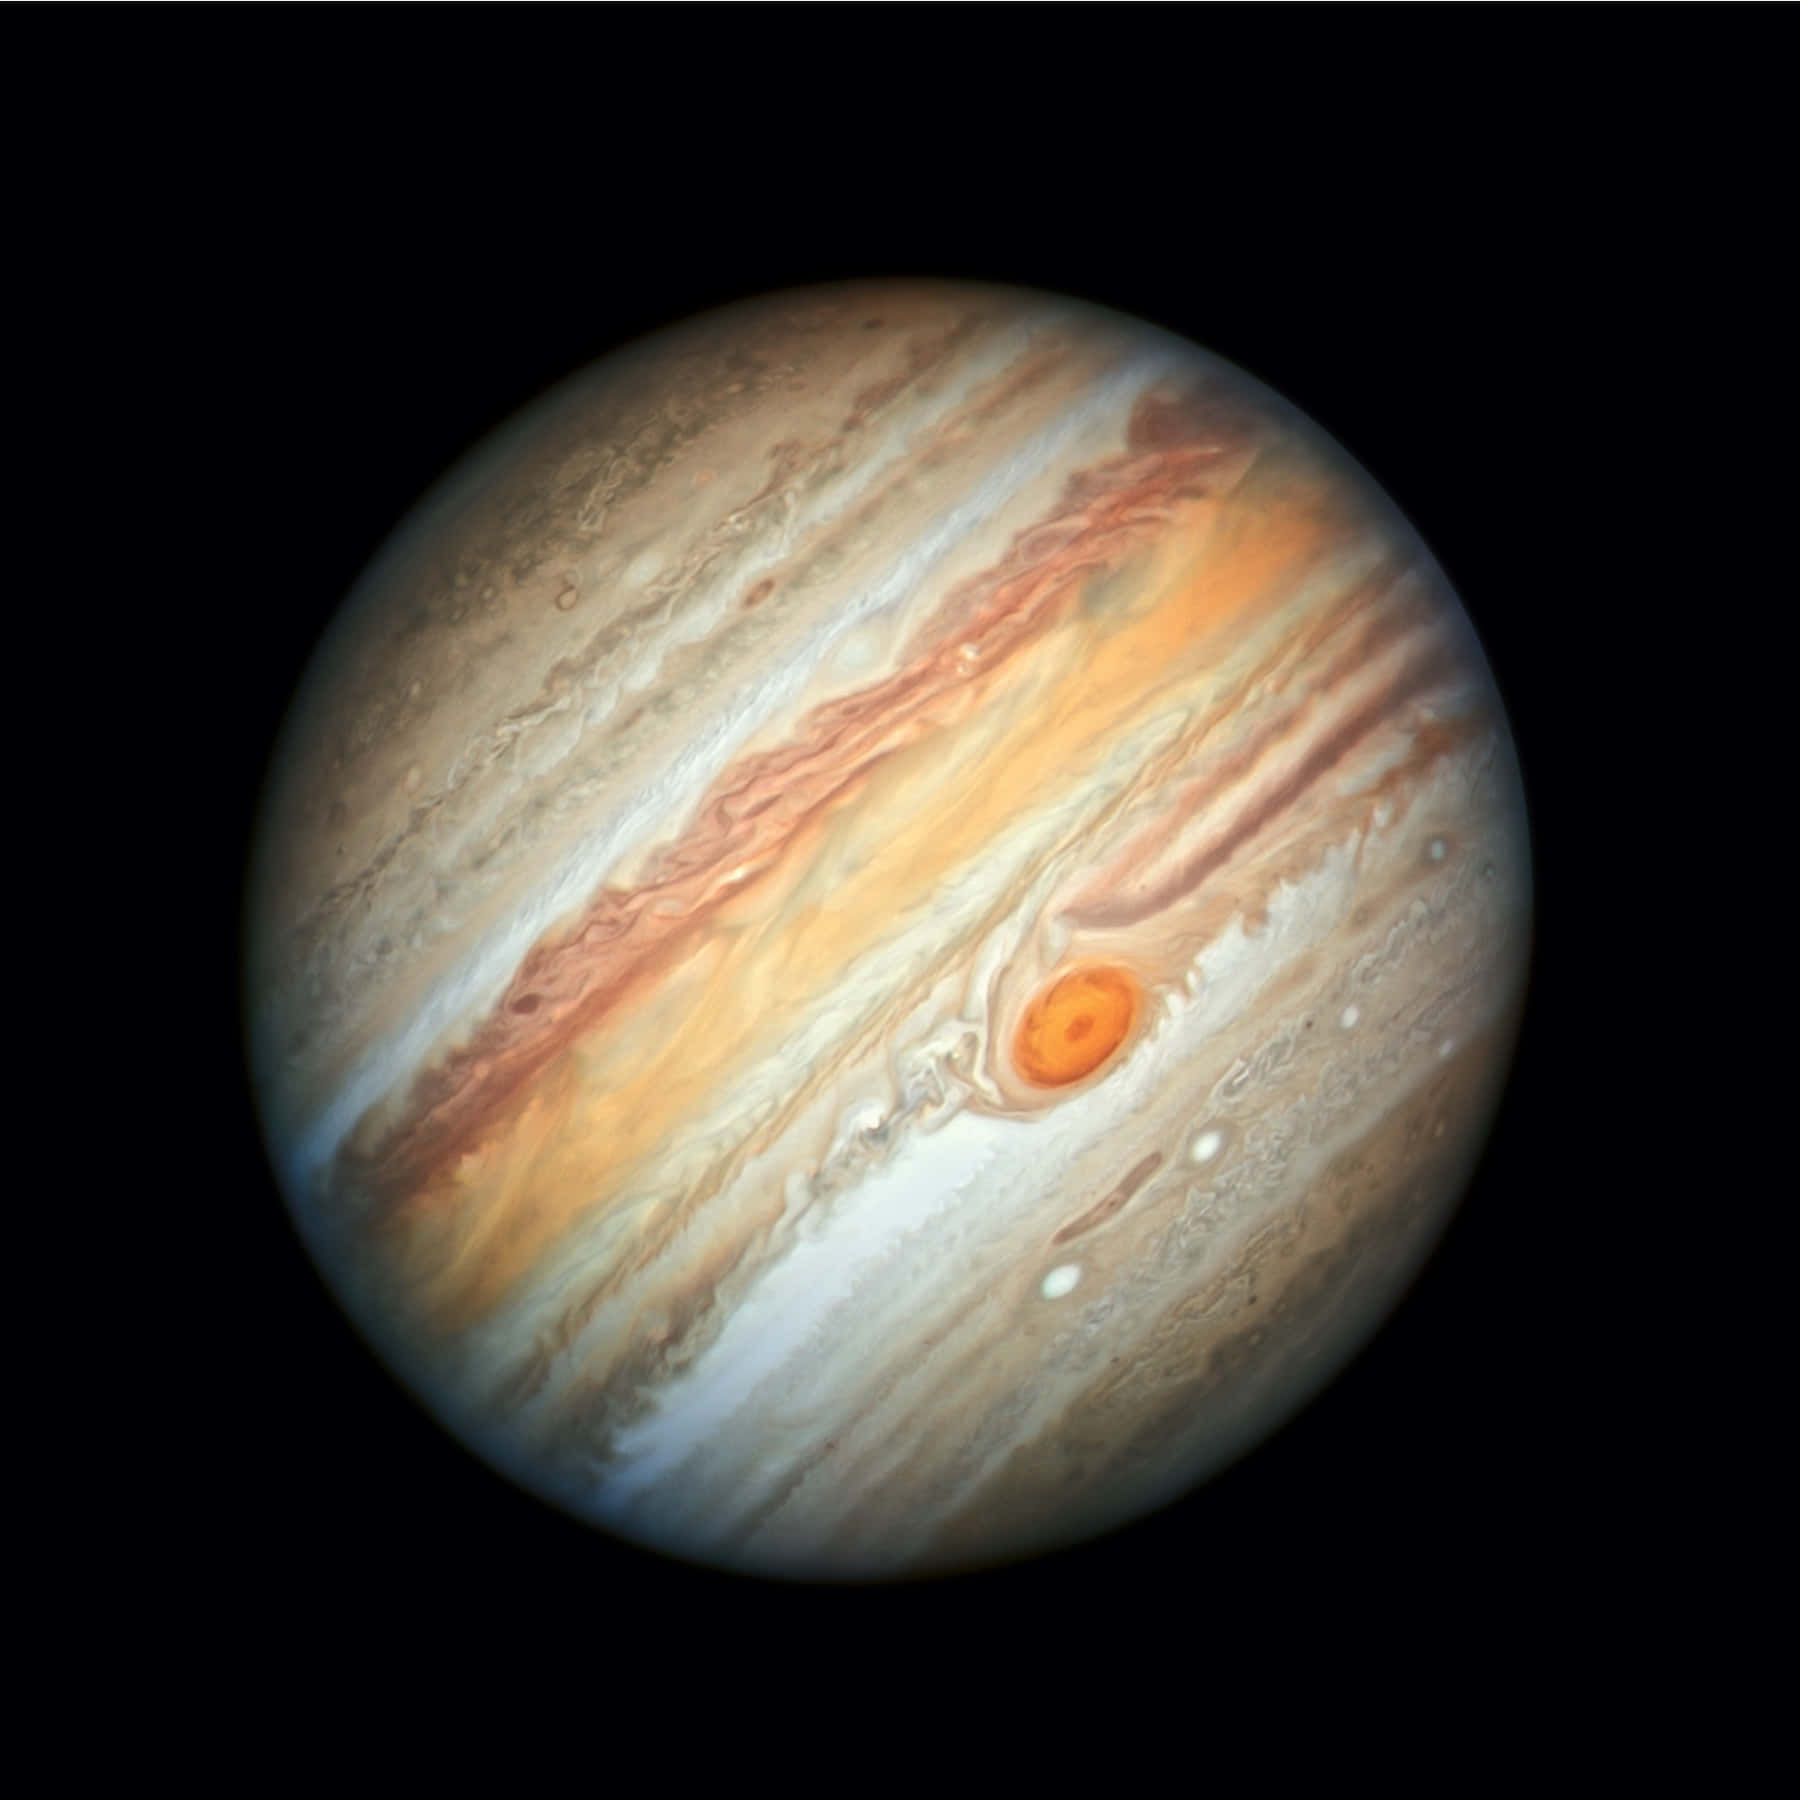 Aerial view of Jupiter's striped cloud structure